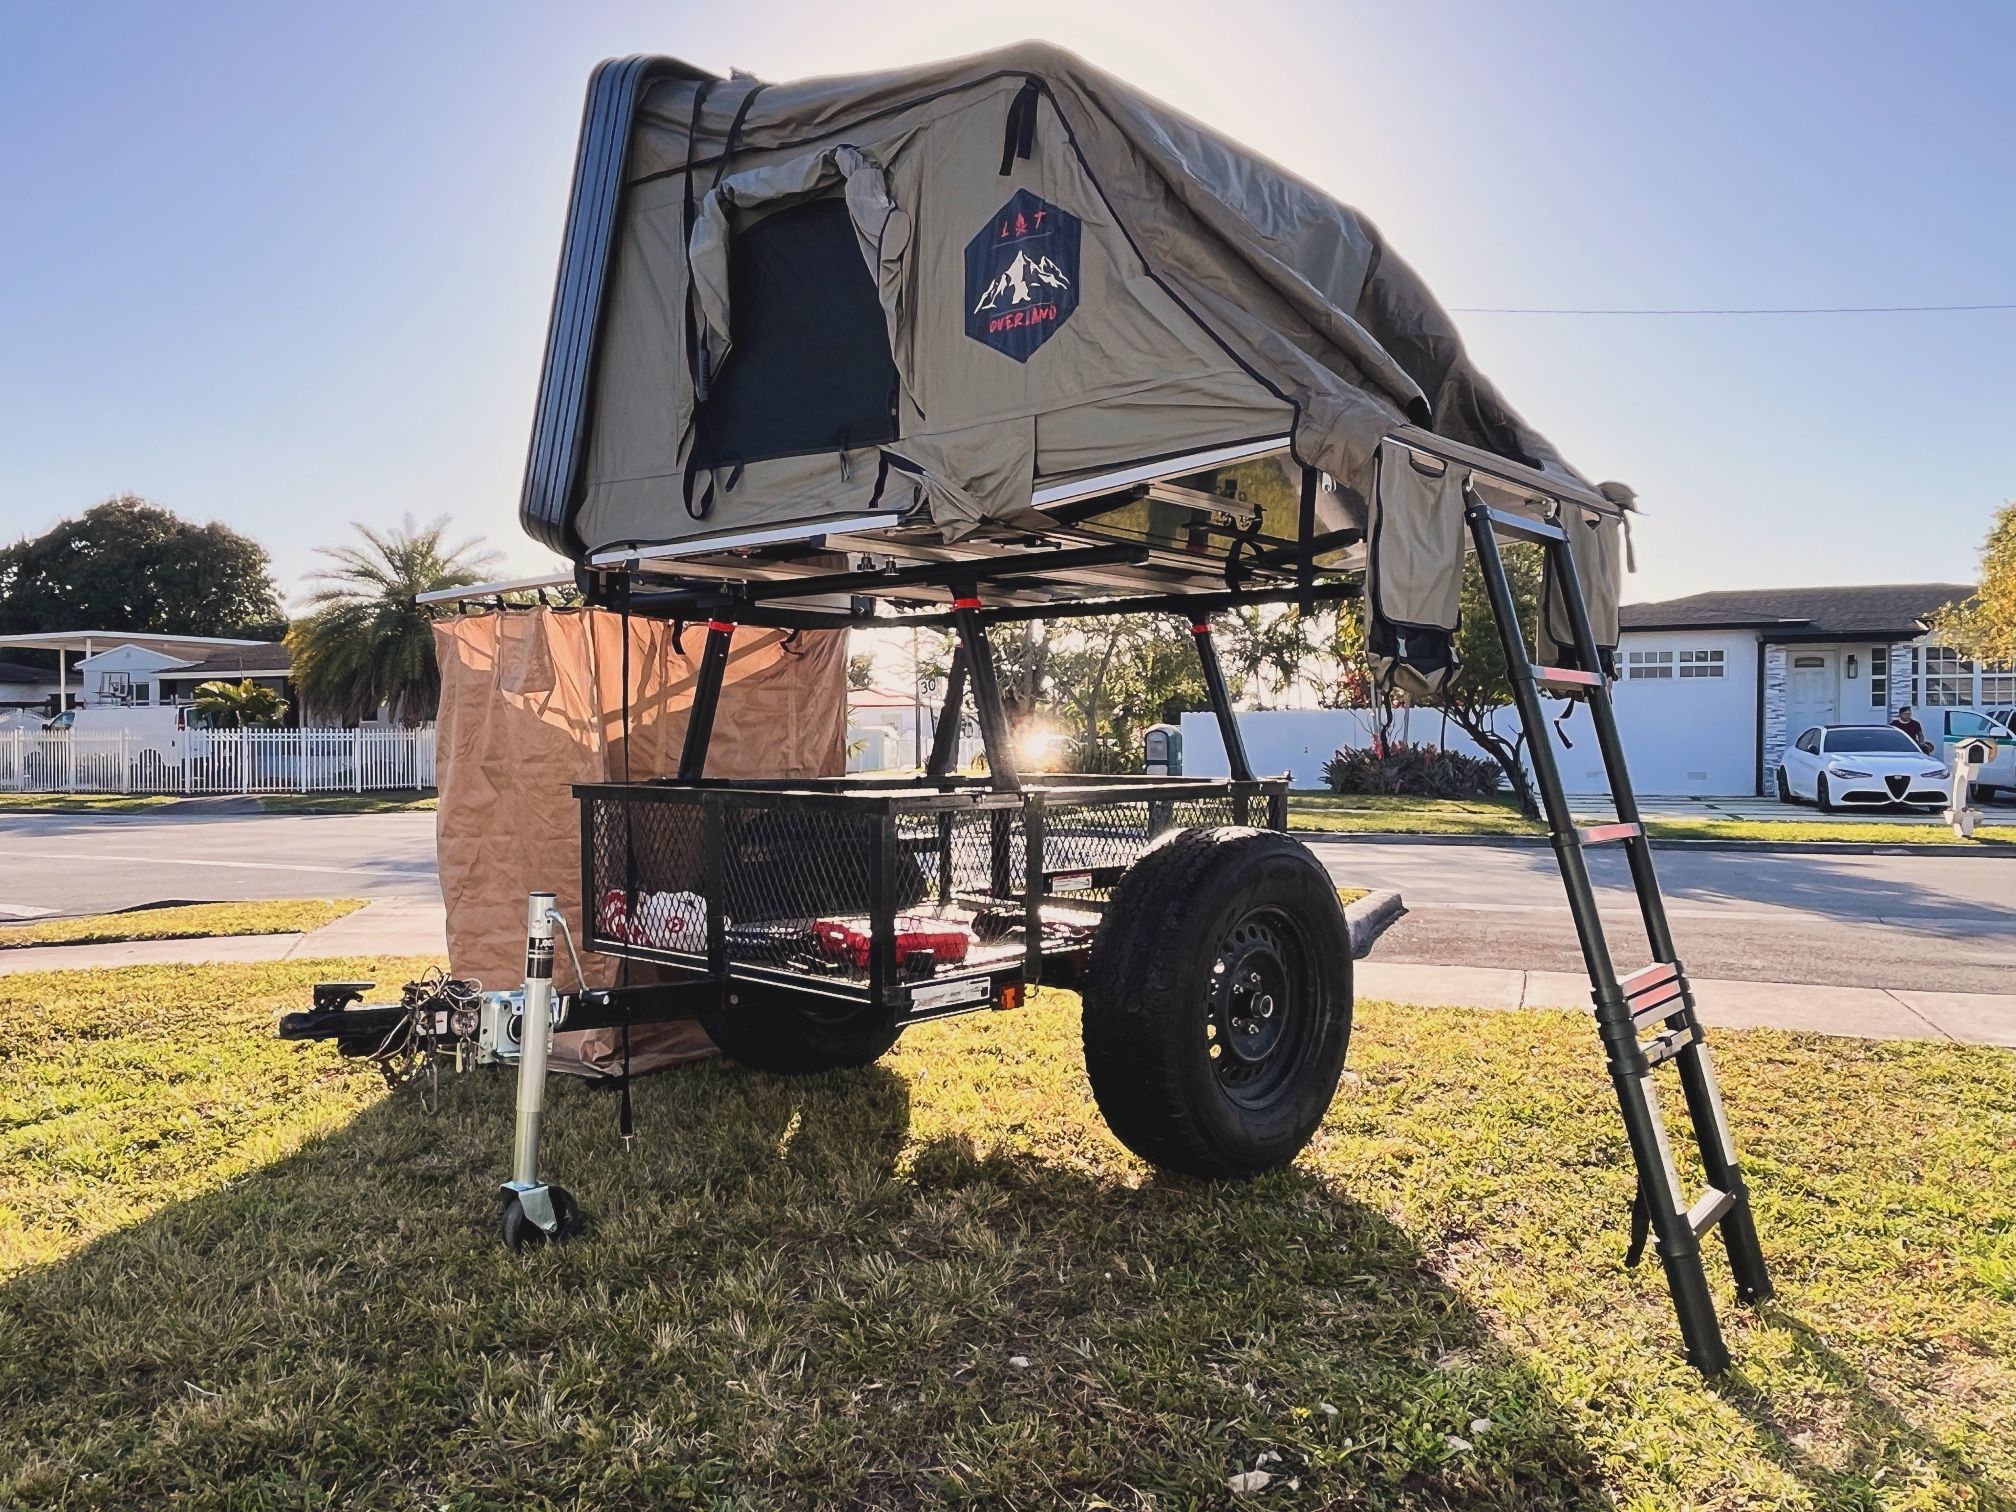 Overlanding Trailer Ready For Adventure Just Connect Your Vehicle And Have Fun 5x4ft With Rack And Jack